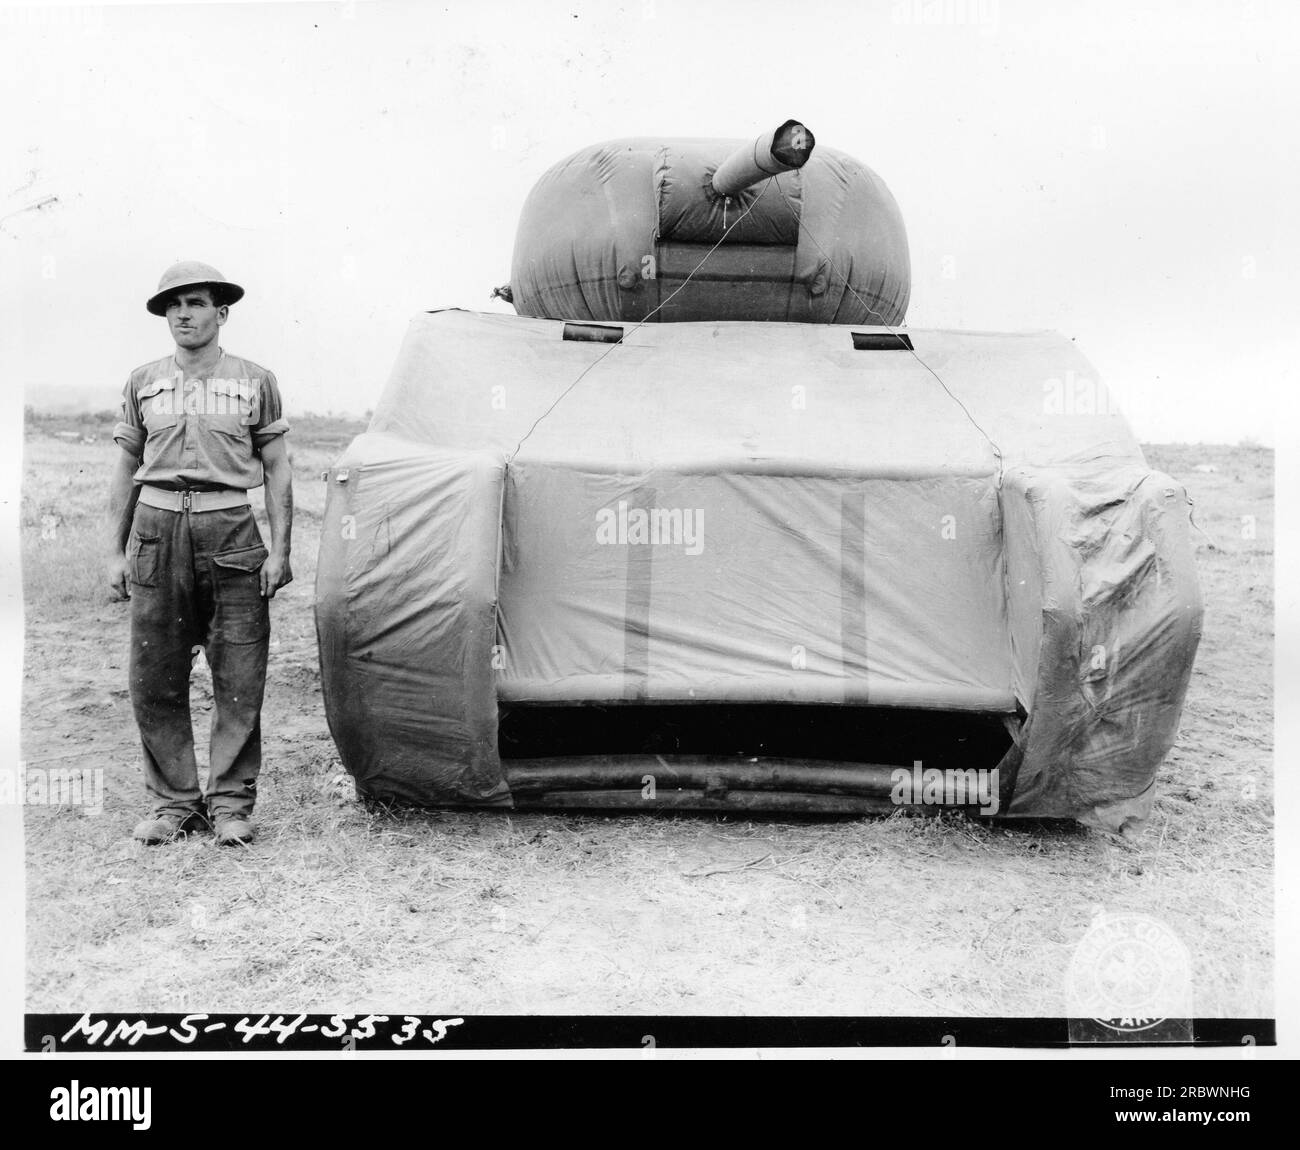 Front view of a dummy tank, specifically the British MM-5-44-5535, used for military deception during World War One. These dummy tanks were created to deceive enemy forces by appearing as operational tanks from a distance, raising questions about their authenticity and purpose. Stock Photo